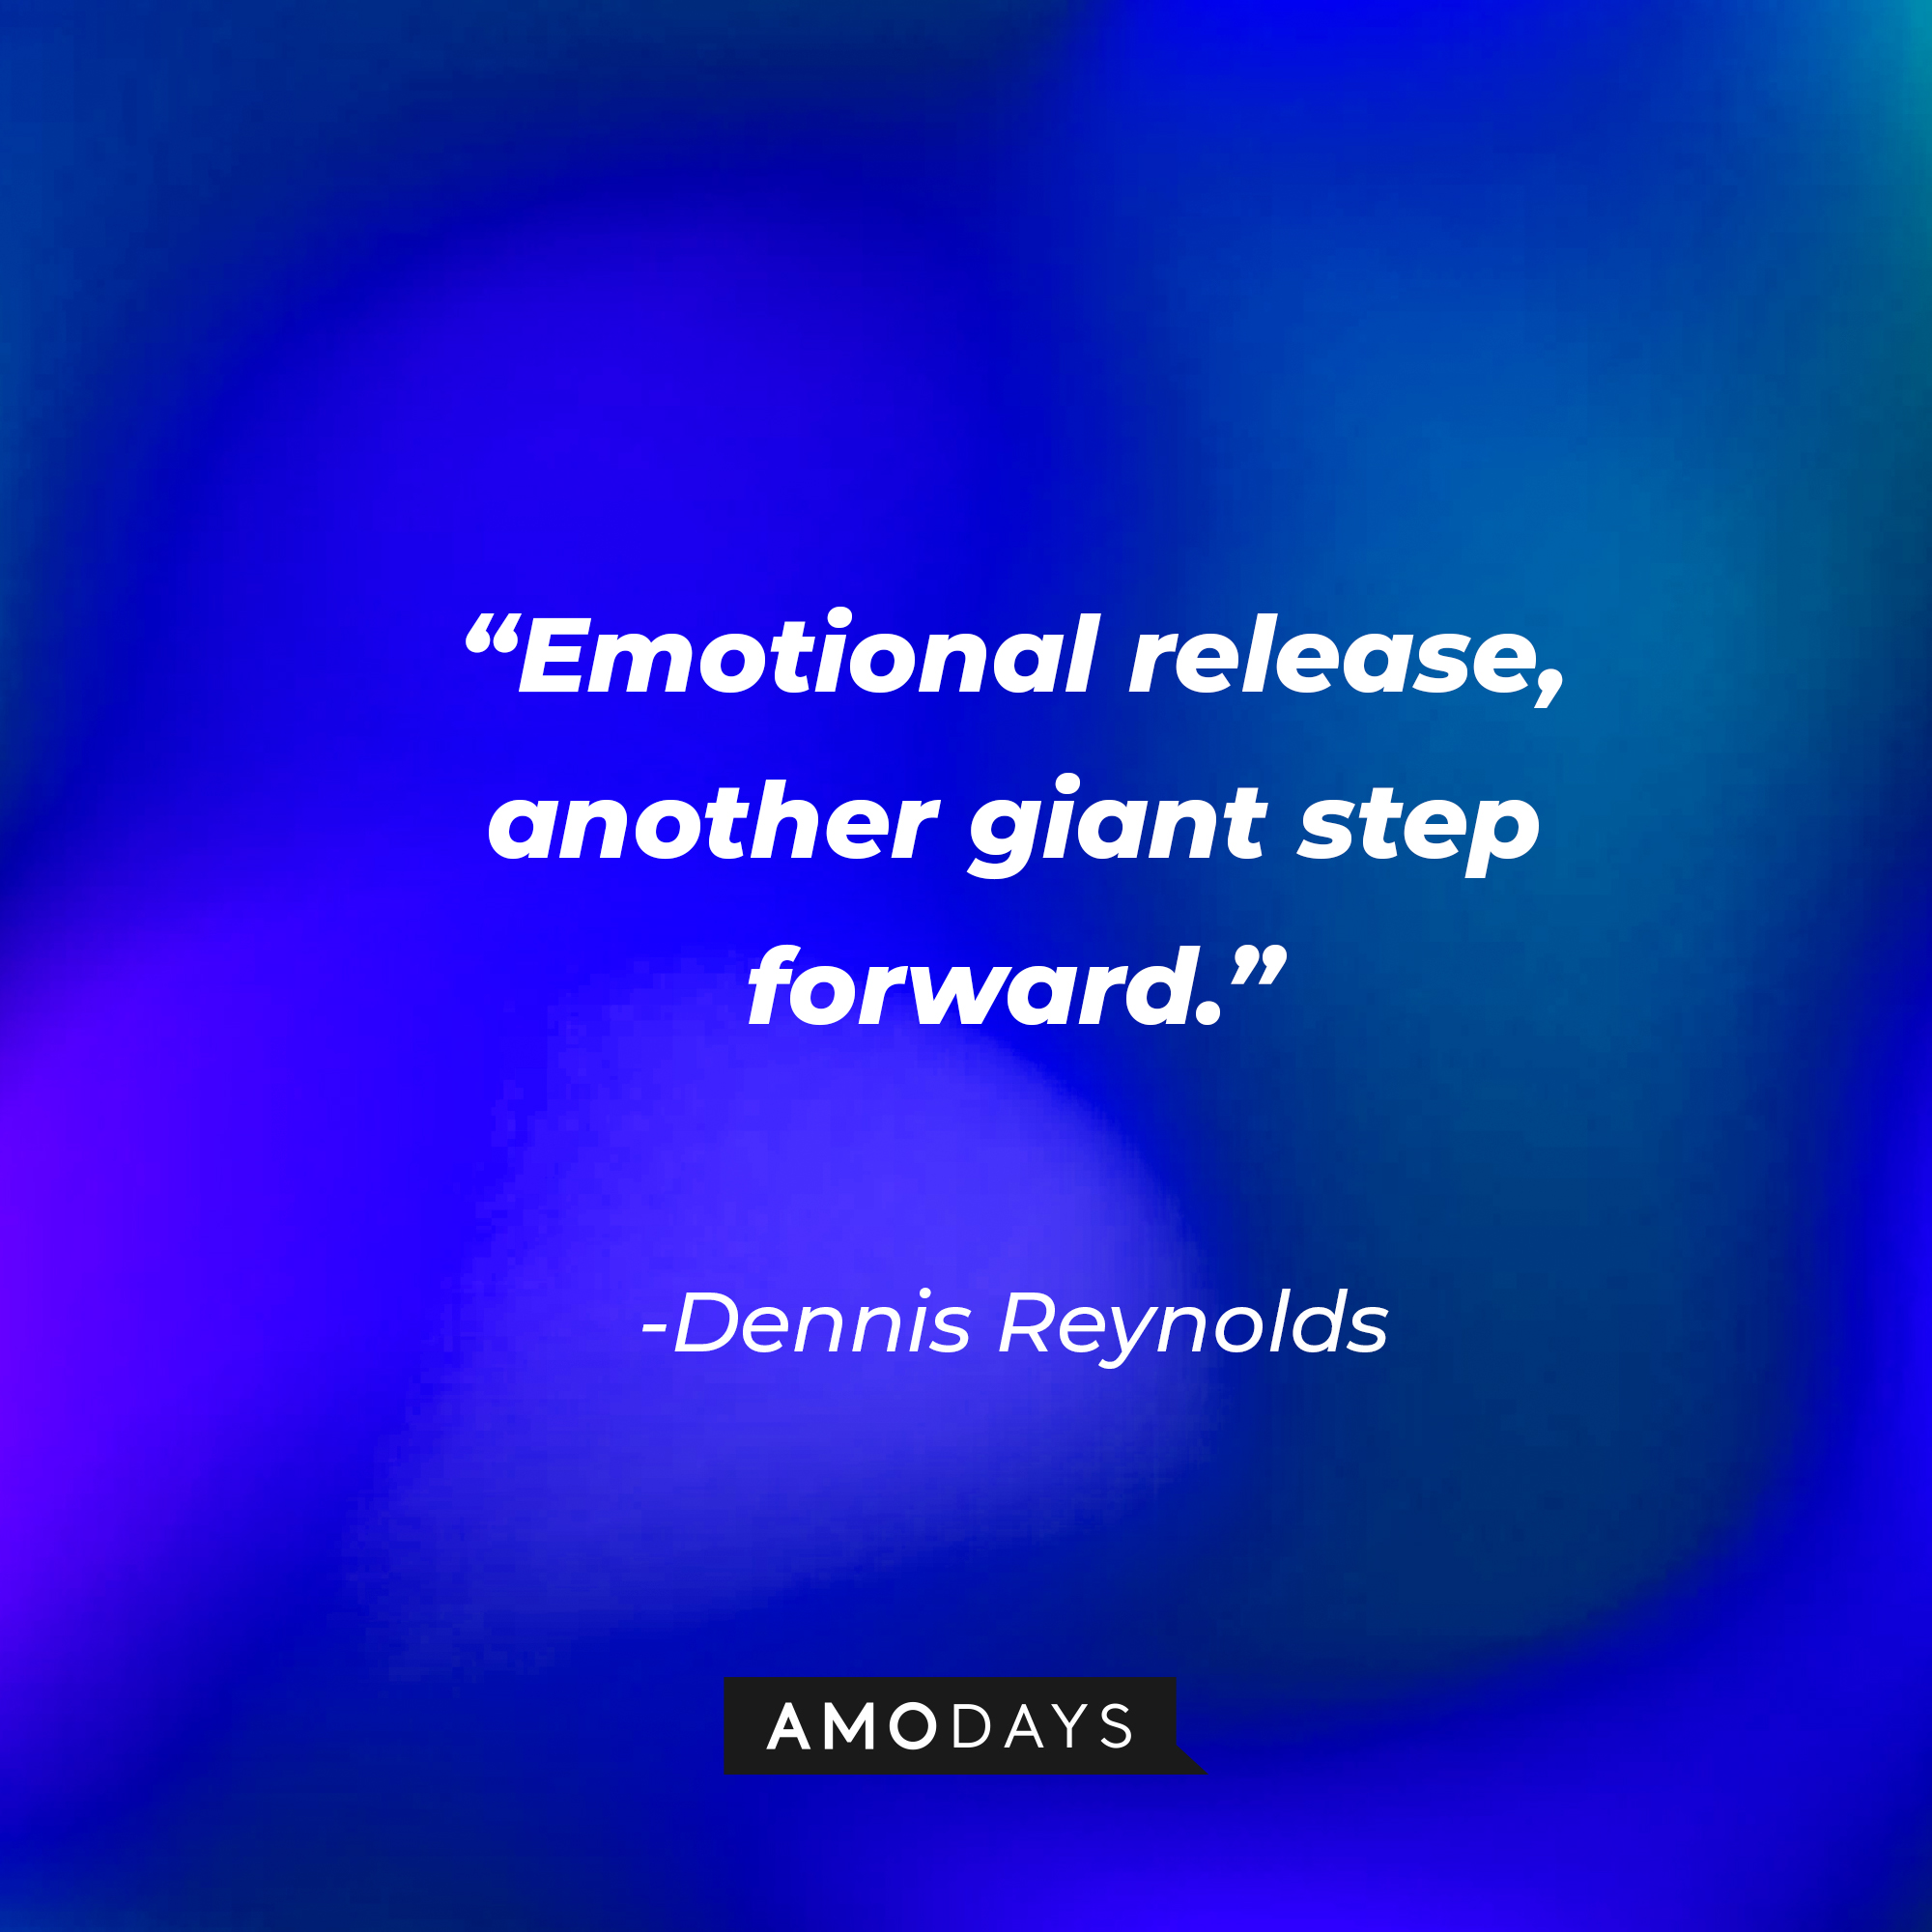 Dennis Reynolds’ quote:  “Emotional release, another giant step forward.” | Source: AmoDays